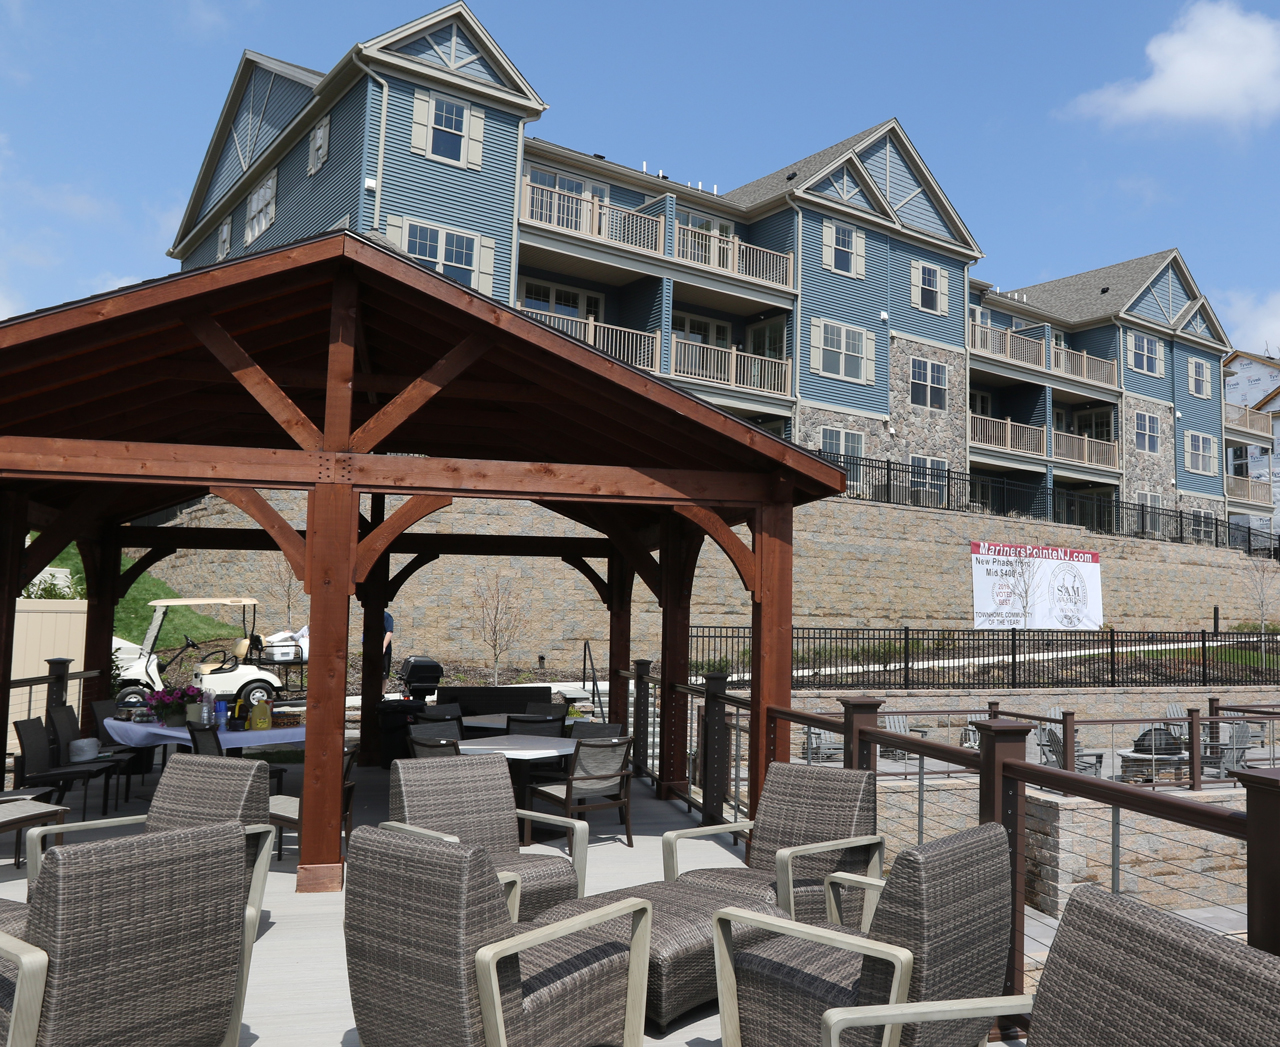 Mariners Pointe Lake Hopatcong New Jersey Pavilion Deck